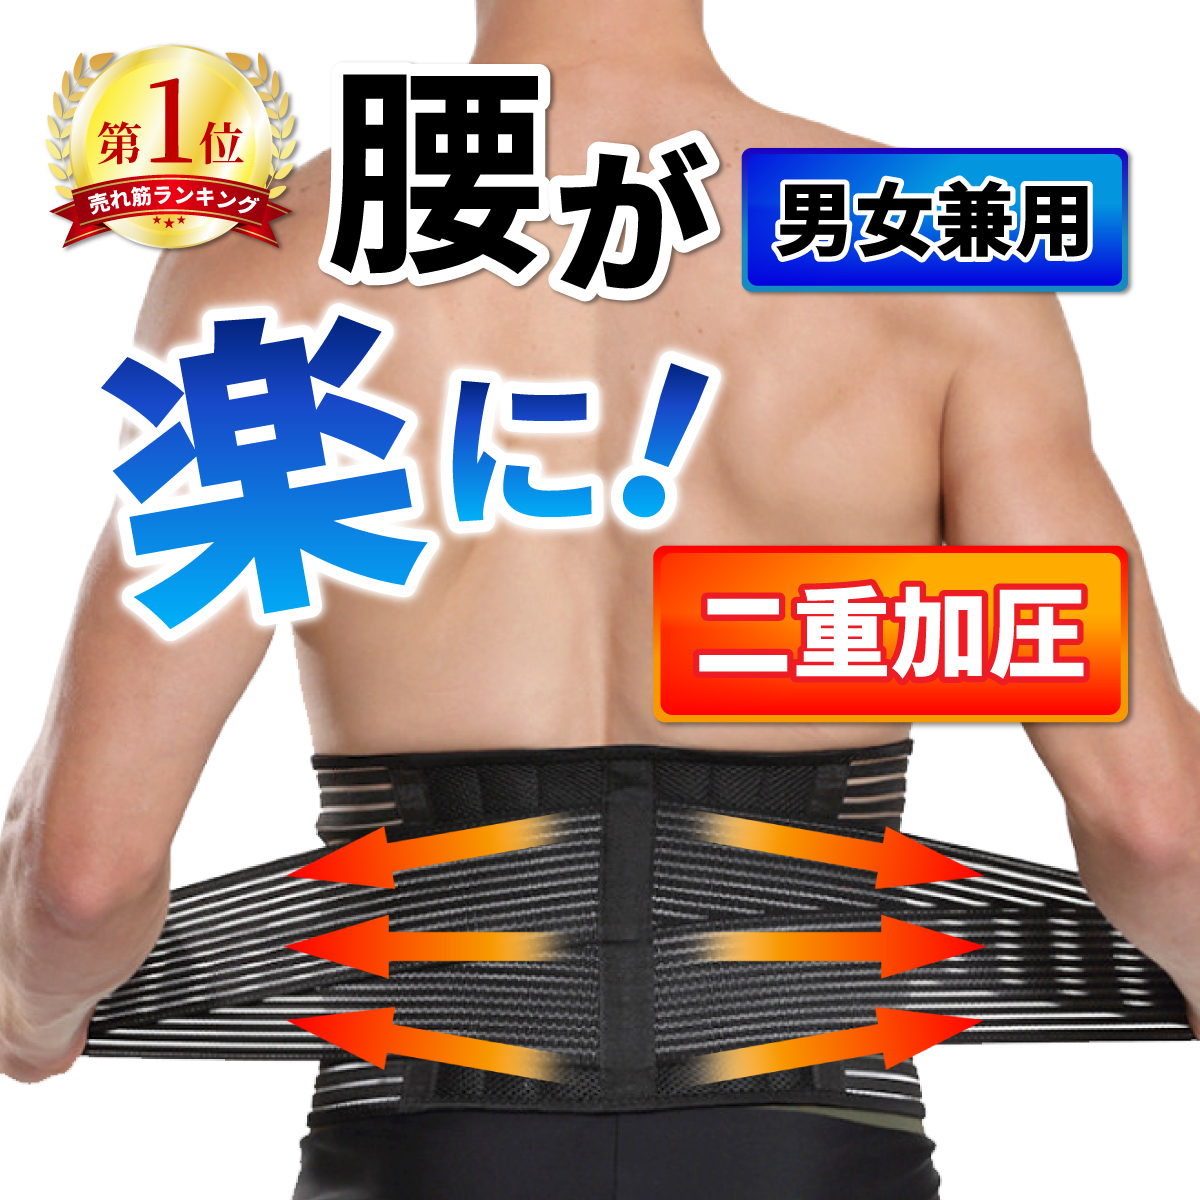  lumbago belt small of the back belt corset support belt supporter cushion sport small of the back . thin type driving for summer mesh woman small of the back . comfort pelvis belt small of the back comfort 